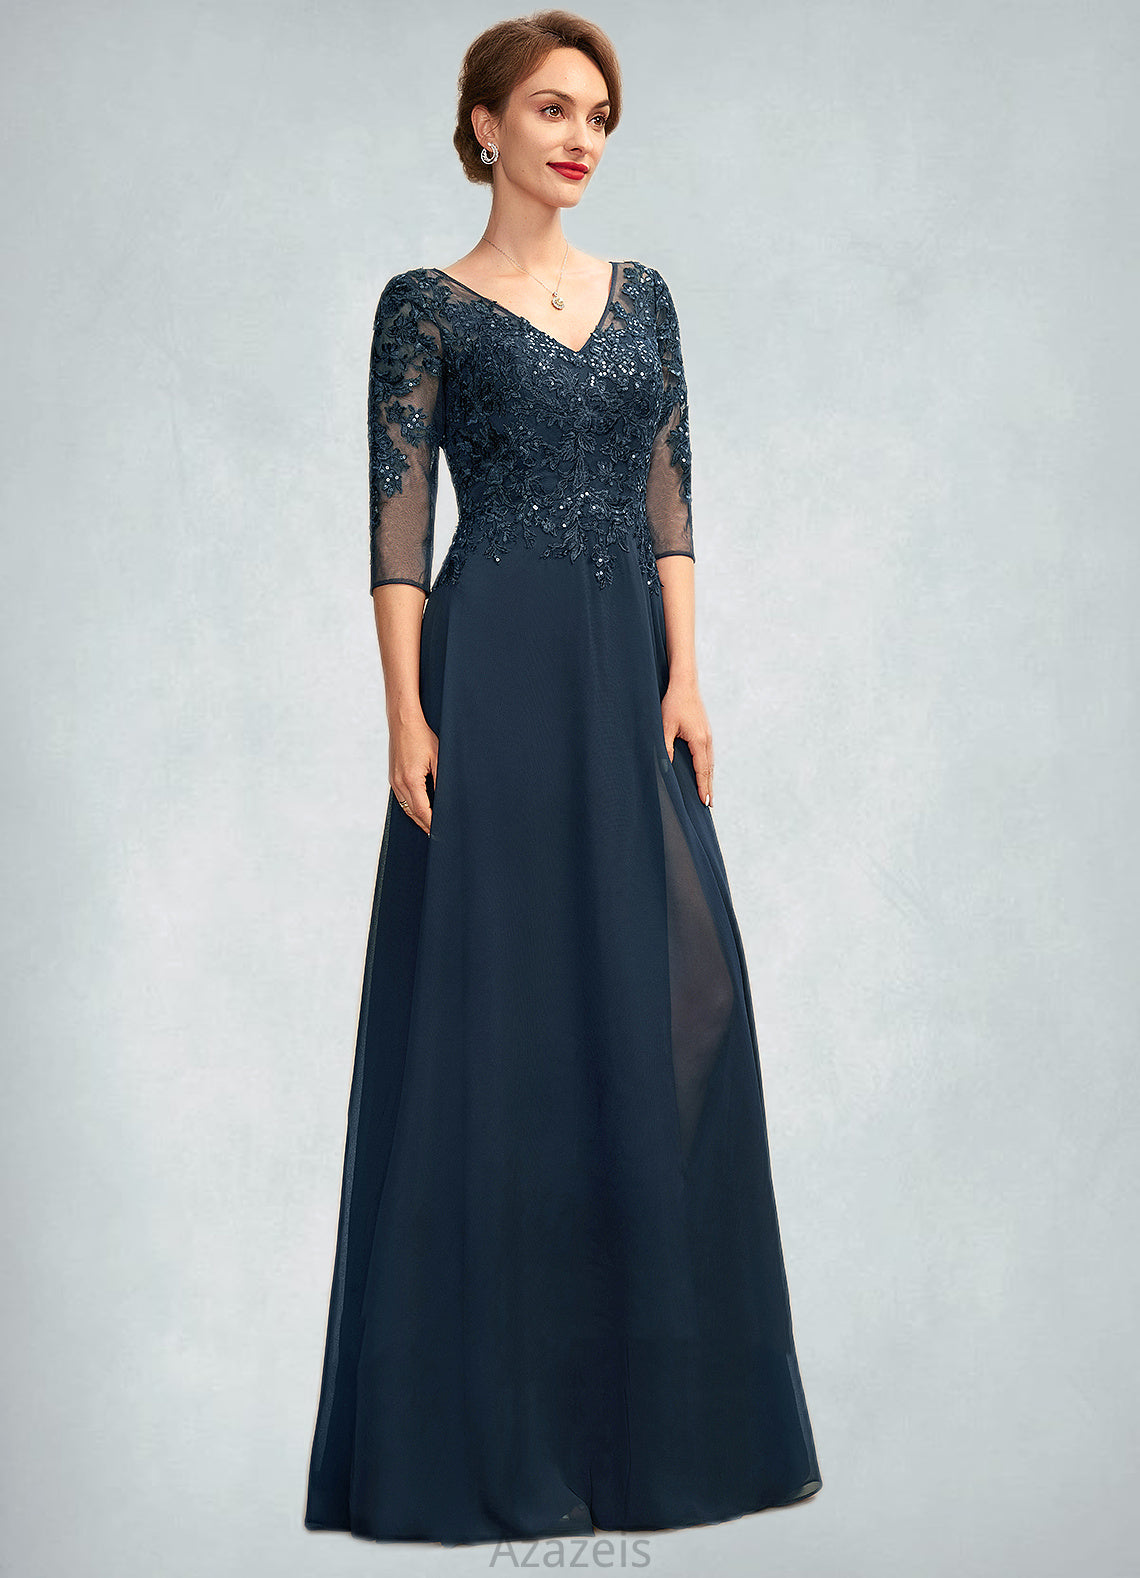 Lorna A-Line V-neck Floor-Length Chiffon Lace Mother of the Bride Dress With Sequins Split Front DF126P0015014